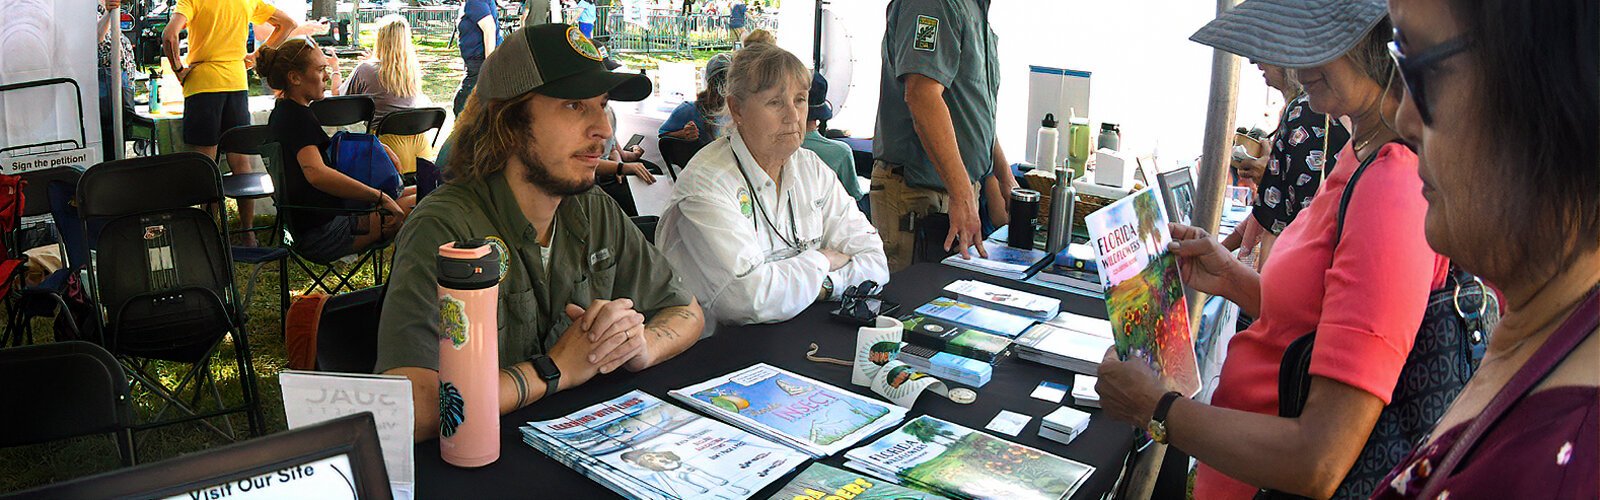 Grayson Grume and Bobbe Rose of the Florida Department of Agriculture are ready to answer questions from visitors at the Local Environmental Groups tent.